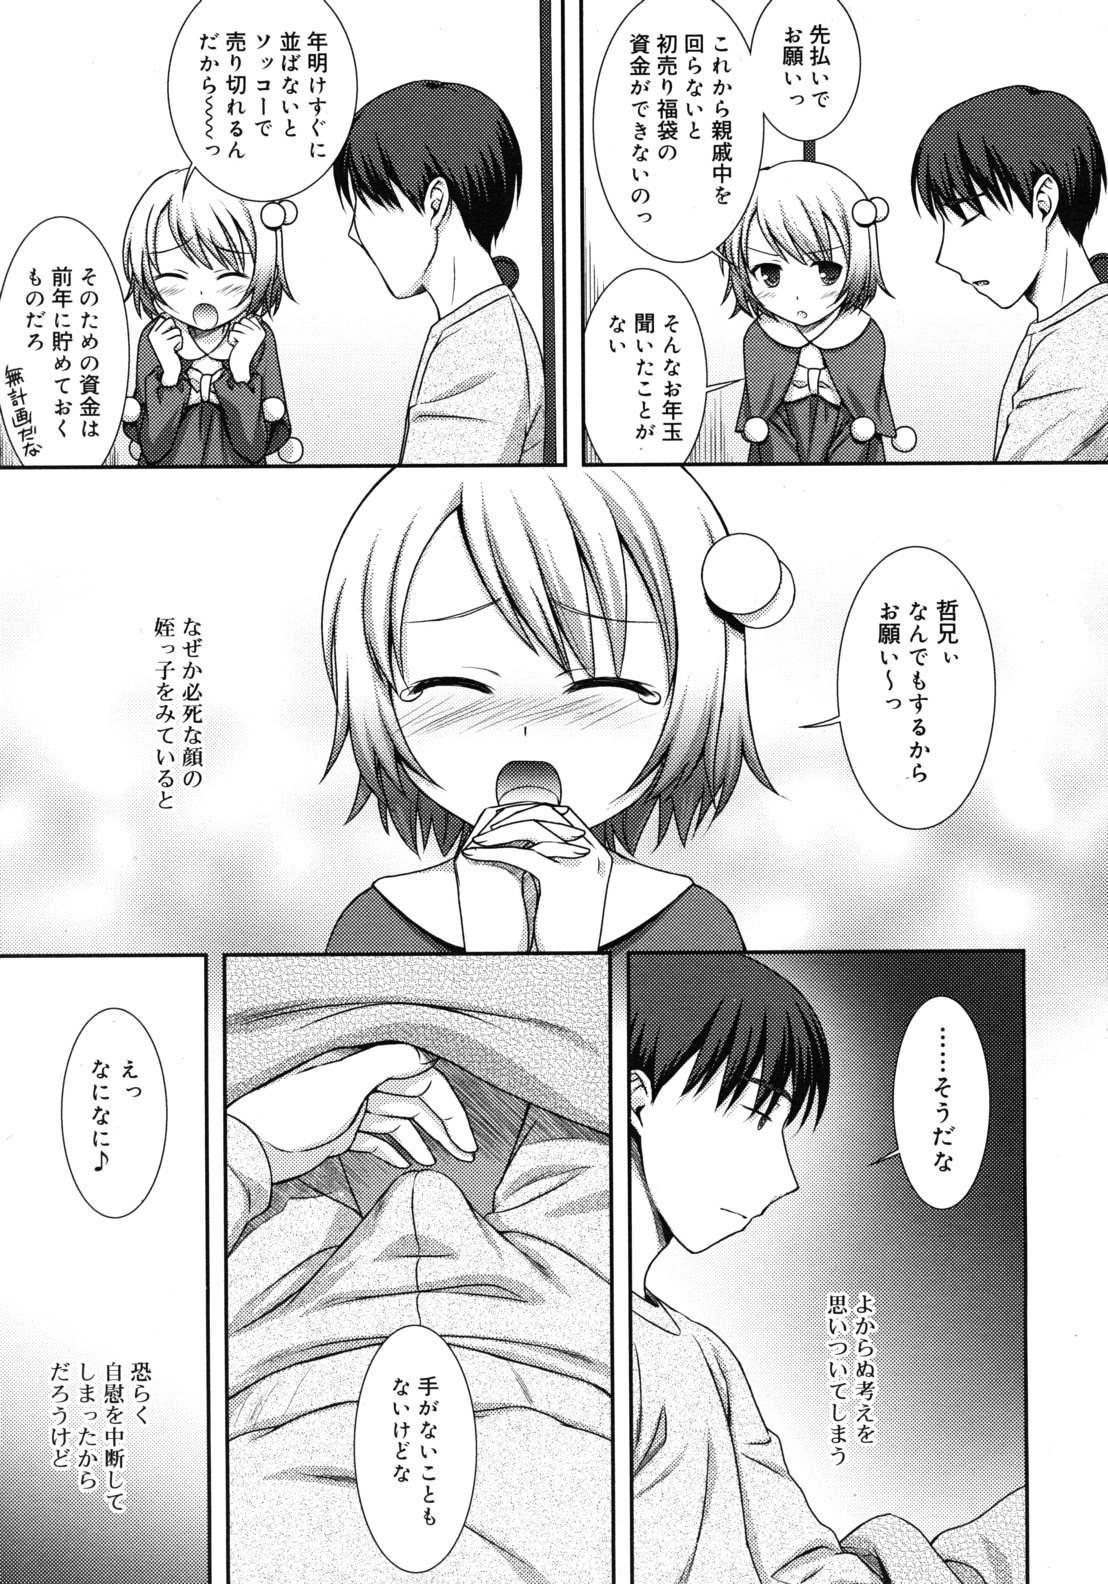 COMIC RiN 2012-02 page 17 full